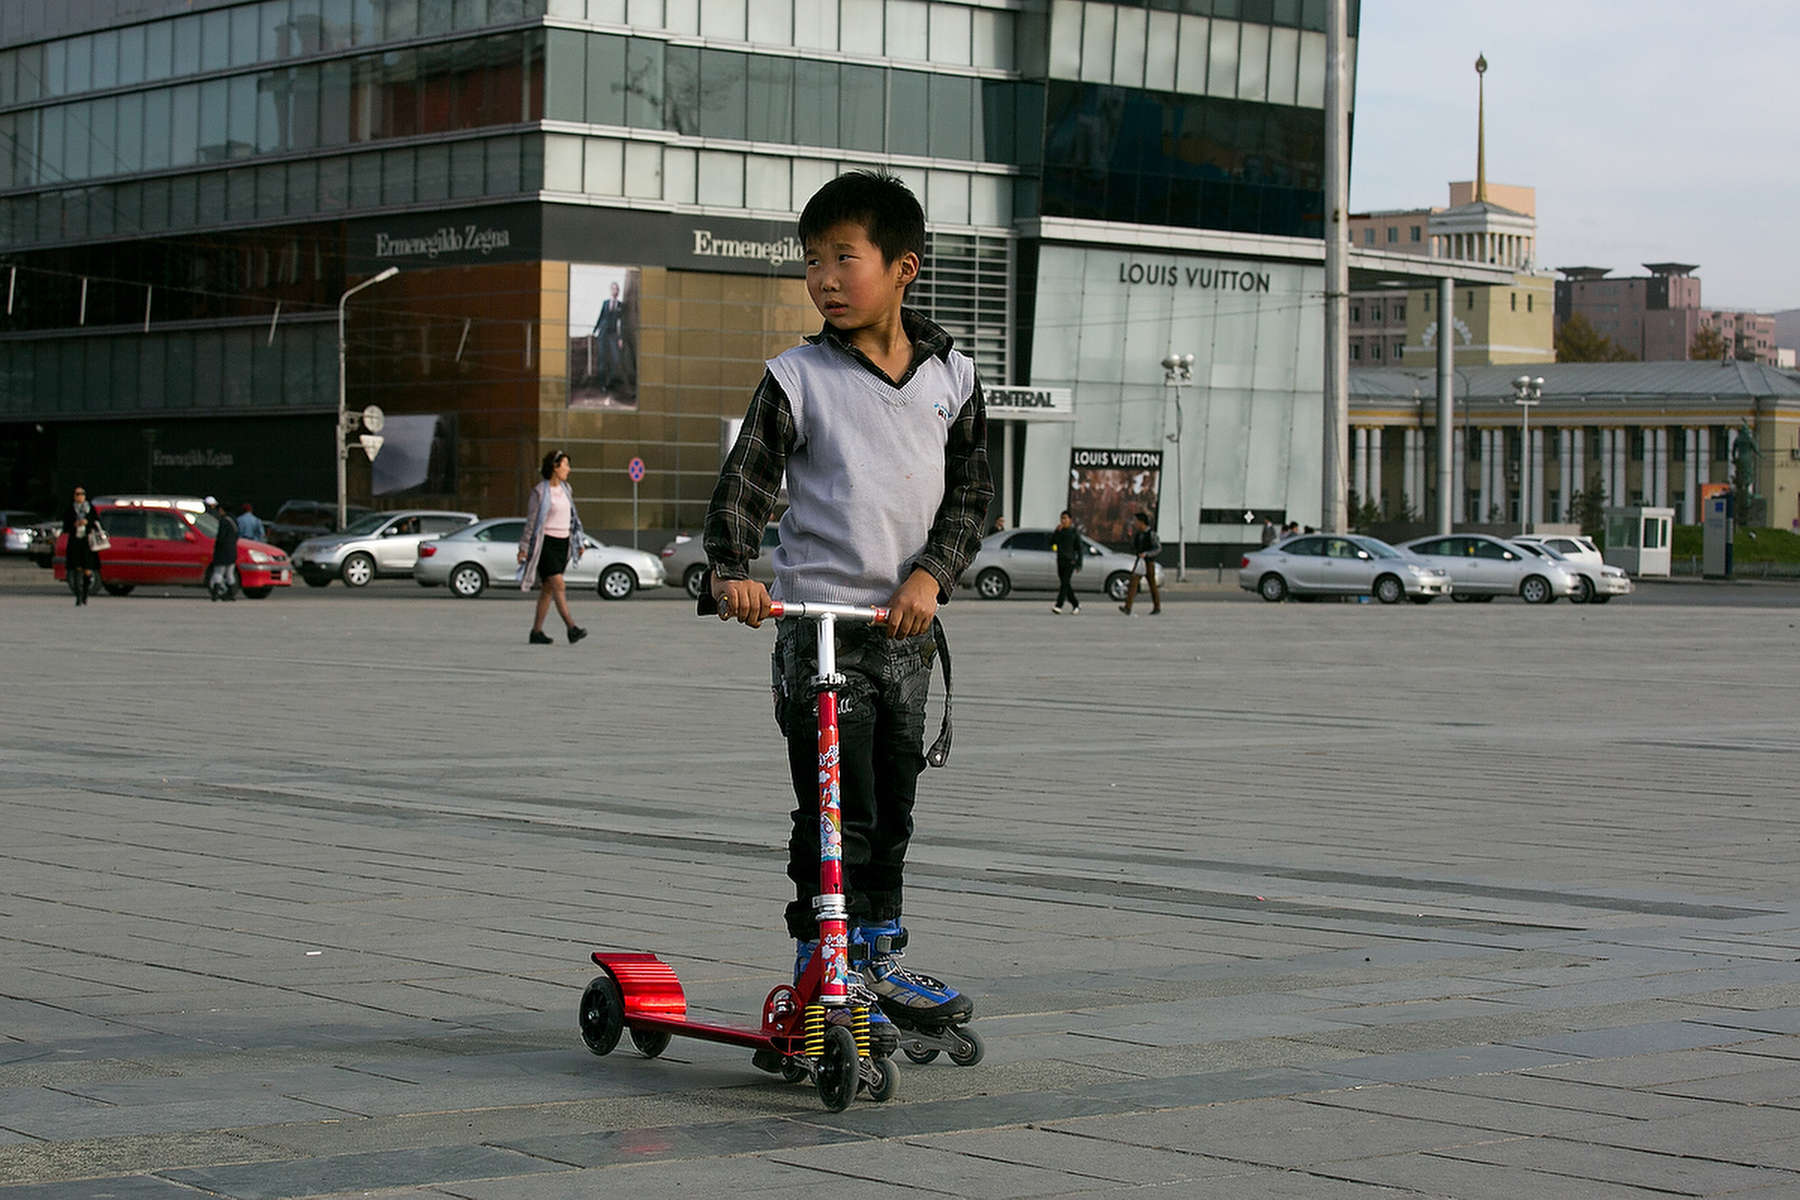 ULAANBATAAR, MONGOLIA - OCTOBER 18: A Mongolian boy on rollerblades hangs out at Sukhbataar Square October 18, 2012 Ulaanbataar, Mongolia. Some 100 years ago, Mongolia gained independence from Qing China, and more than 20 years ago it removed itself from the Soviet Bloc. Since then, the country has been undergoing massive social, economic and political changes. The Oyu Tolgoi, the copper and gold mine is Mongolia’s biggest foreign investment project to date adding an estimated 35% value to the country’s GDP. Mongolia is a land of amazing contrasts and is the most sparsely populated country on earth with fewer than 3 million people. (Photo by Paula Bronstein/Getty Images)